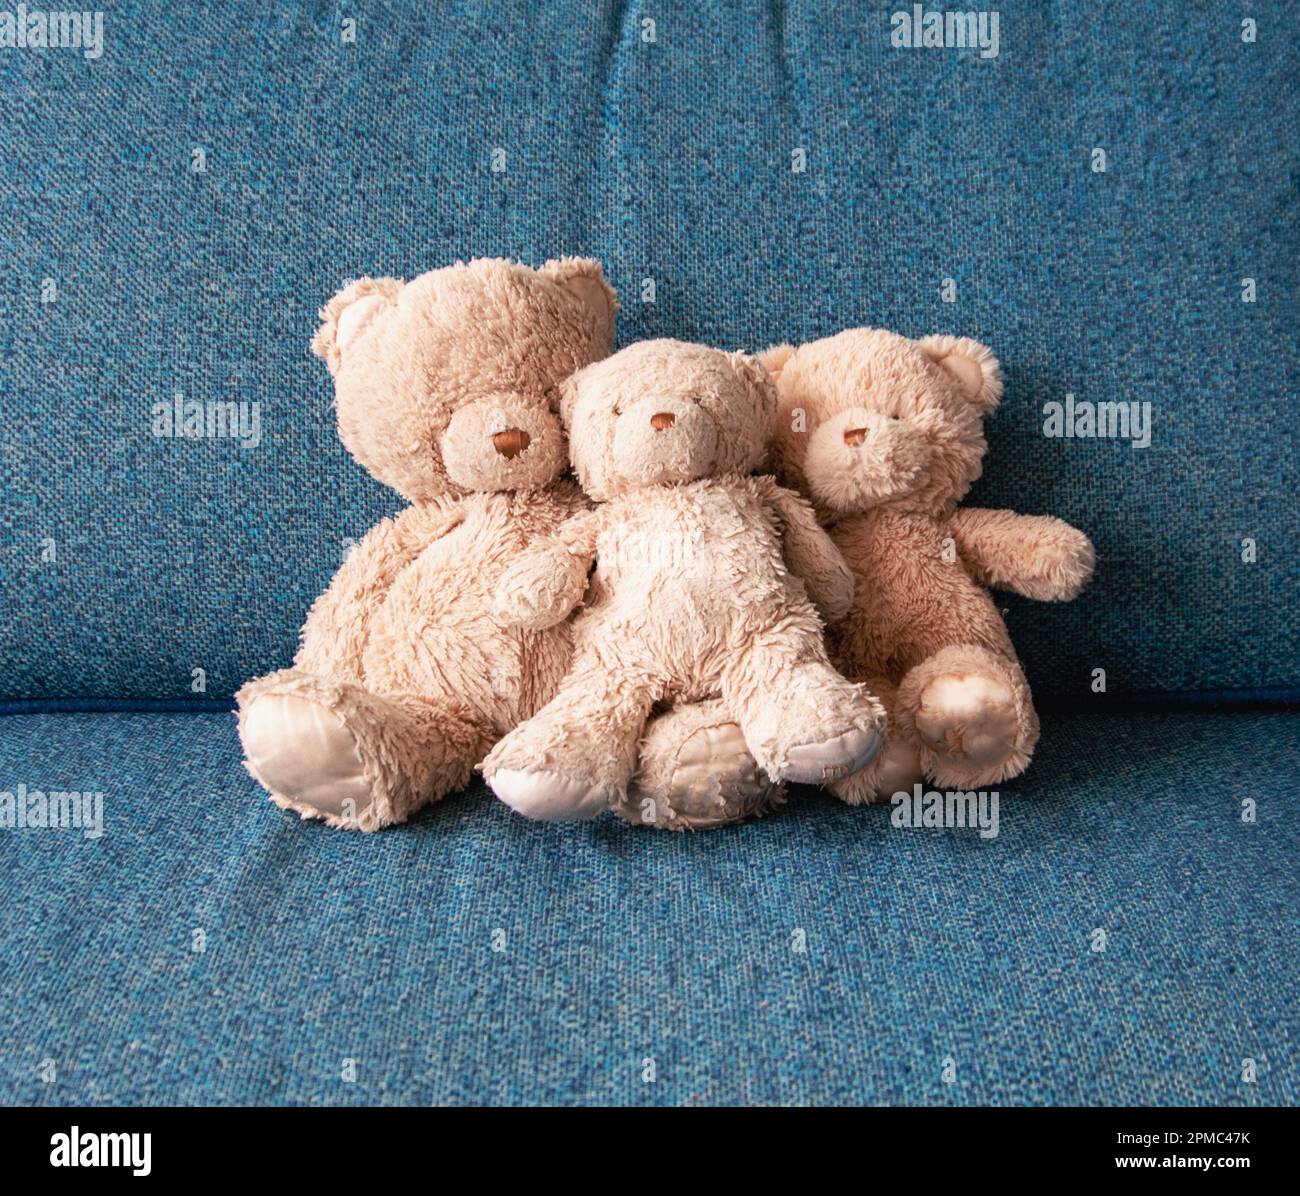 Three fuzzy well-loved teddy bears sitting on a textured couch. Stock Photo